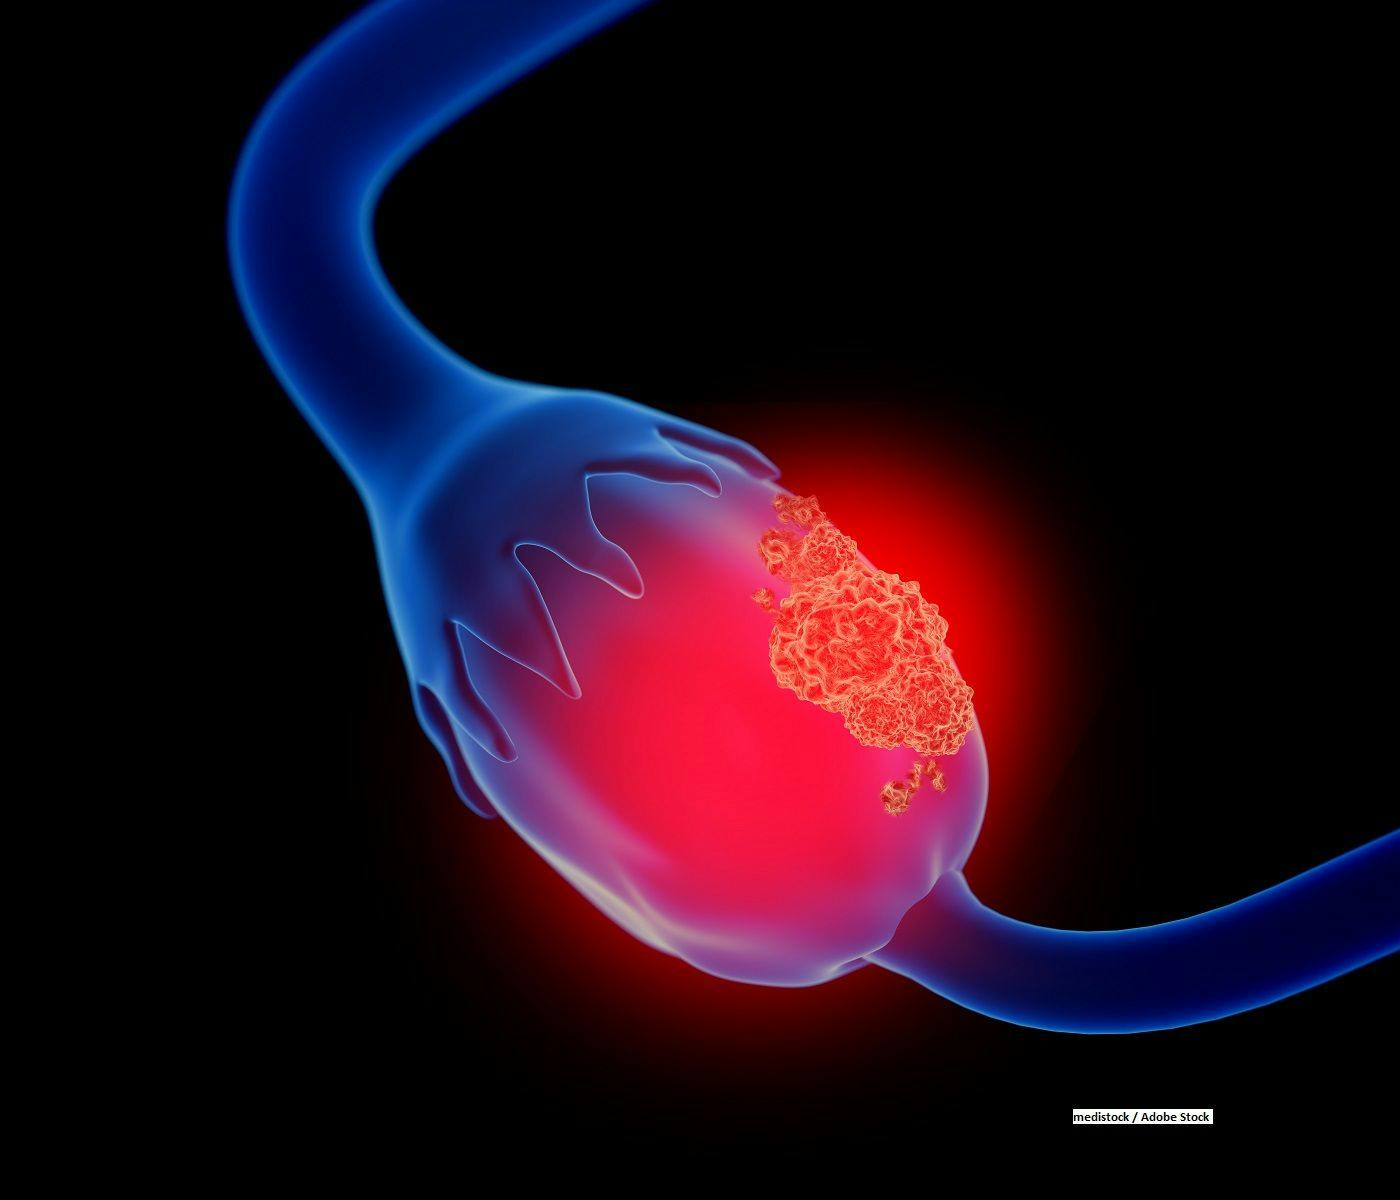 Maintenance olaparib plus bevacizumab may improve survival in patients with high-grade ovarian cancer regardless of BRCA mutation location, according to a subgroup analysis of the PAOLA-1/ENGOT-ov25 trial.